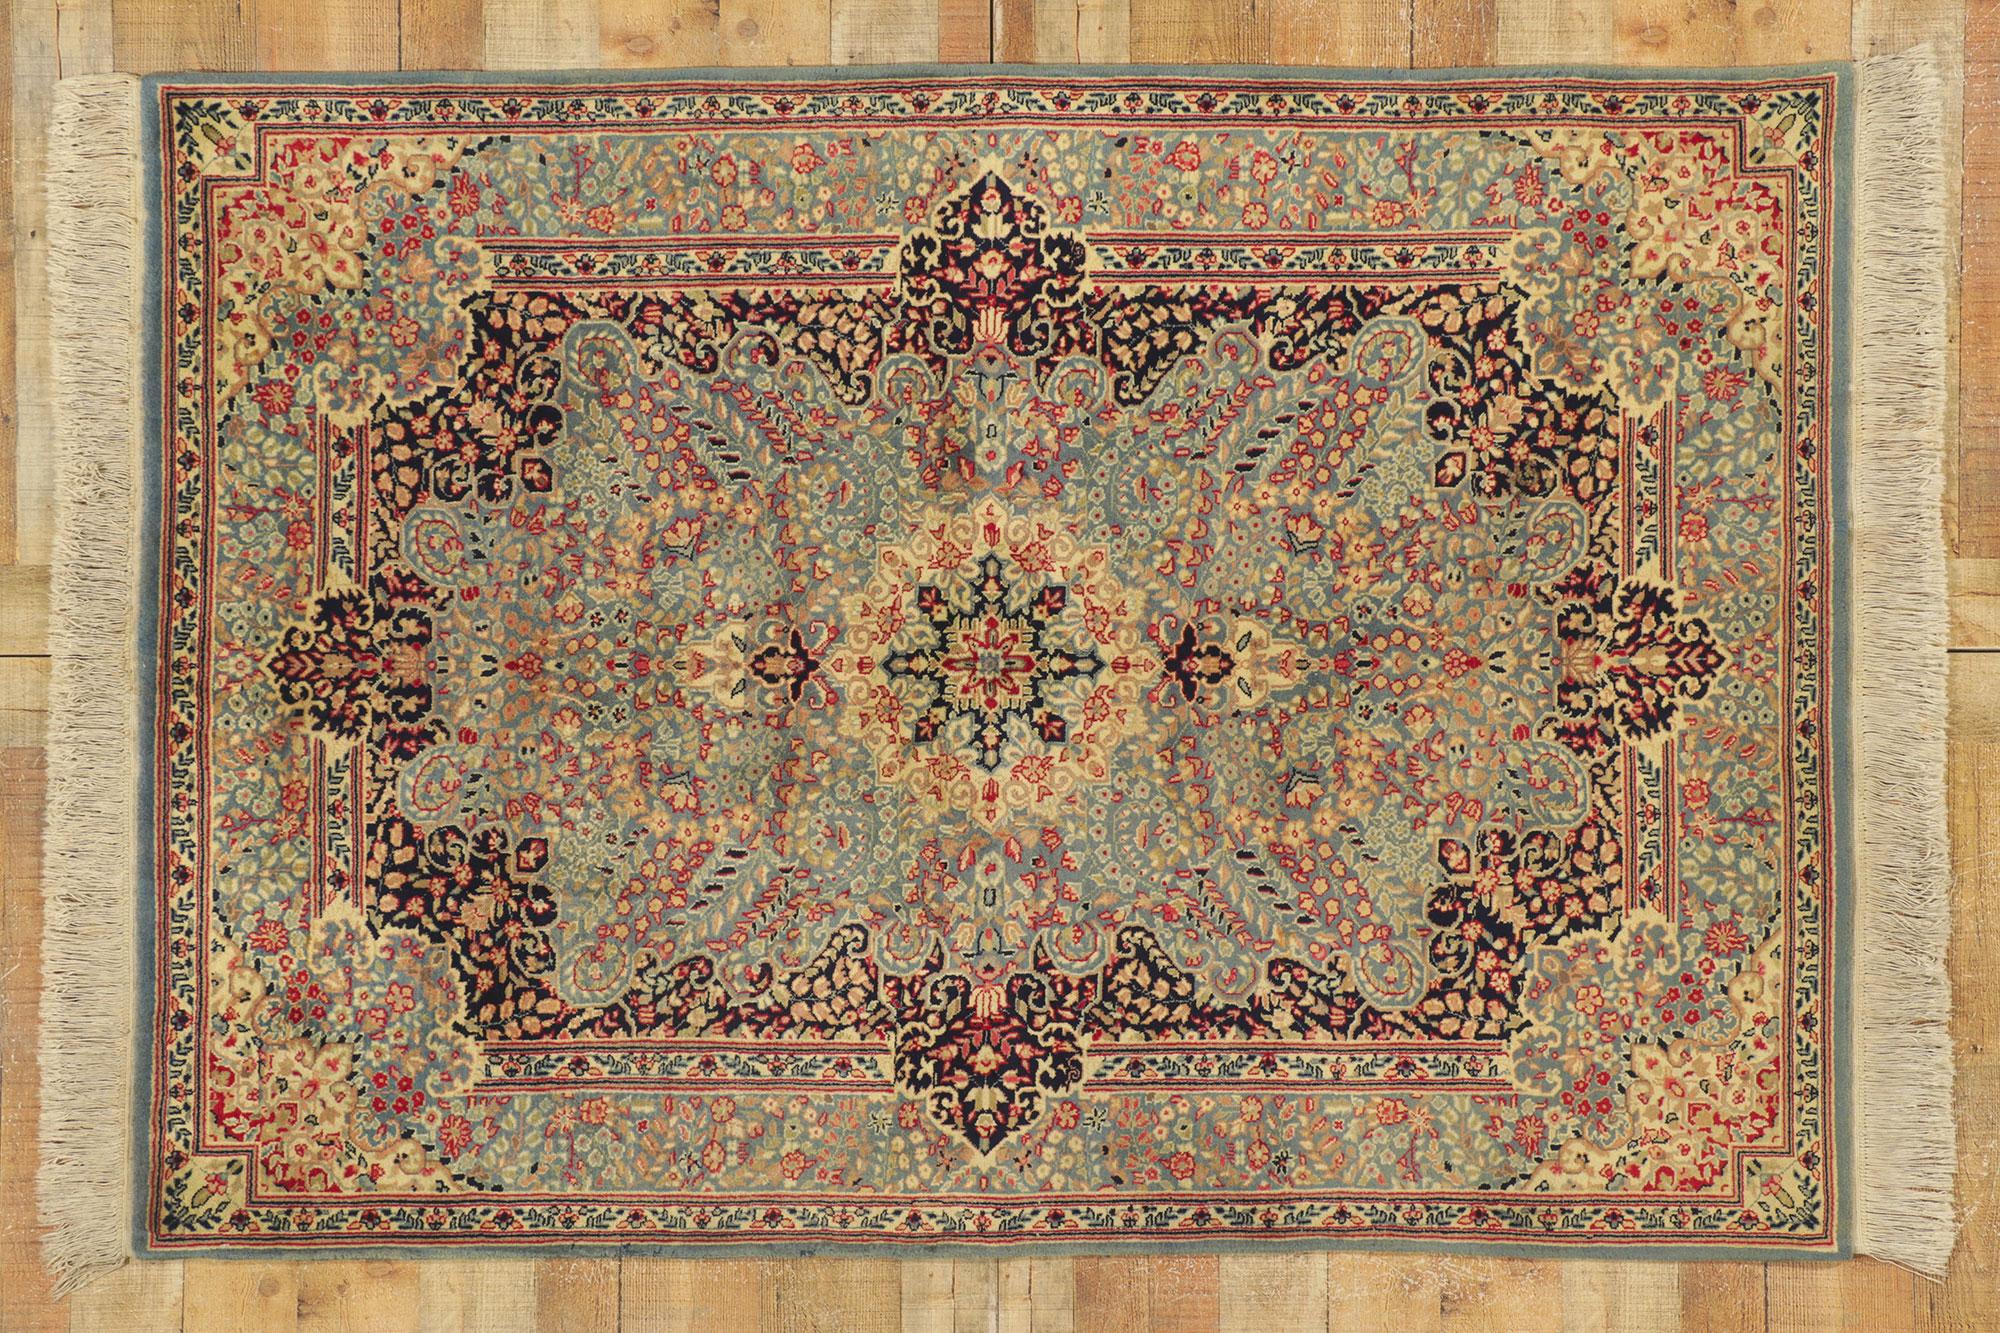 21681 Antique Persian Kerman Rug, 04'07 x 06'07. Sophisticated and refined with a Victorian style, this hand knotted wool antique Persian Kerman rug charms with ease. Taking centre stage is a concentric eight-point cusped medallion anchored with